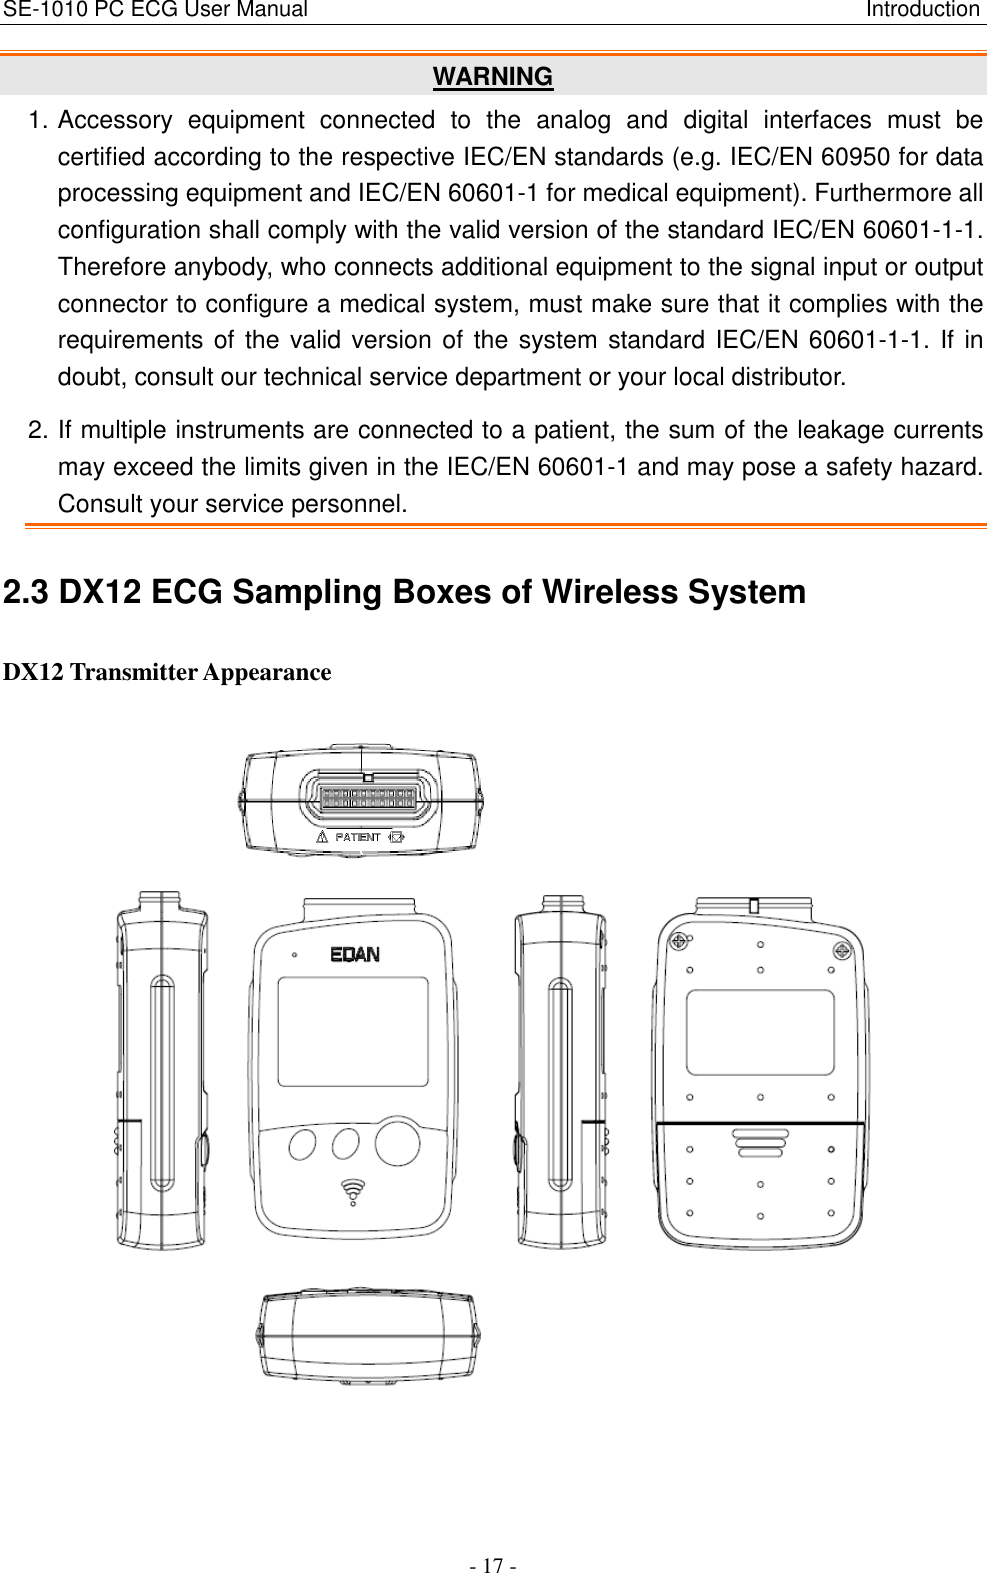 SE-1010 PC ECG User Manual                                                                                                      Introduction - 17 - WARNING 1. Accessory  equipment  connected  to  the  analog  and  digital  interfaces  must  be certified according to the respective IEC/EN standards (e.g. IEC/EN 60950 for data processing equipment and IEC/EN 60601-1 for medical equipment). Furthermore all configuration shall comply with the valid version of the standard IEC/EN 60601-1-1. Therefore anybody, who connects additional equipment to the signal input or output connector to configure a medical system, must make sure that it complies with the requirements of the valid version of the system standard IEC/EN 60601-1-1. If in doubt, consult our technical service department or your local distributor. 2. If multiple instruments are connected to a patient, the sum of the leakage currents may exceed the limits given in the IEC/EN 60601-1 and may pose a safety hazard. Consult your service personnel. 2.3 DX12 ECG Sampling Boxes of Wireless System DX12 Transmitter Appearance                 